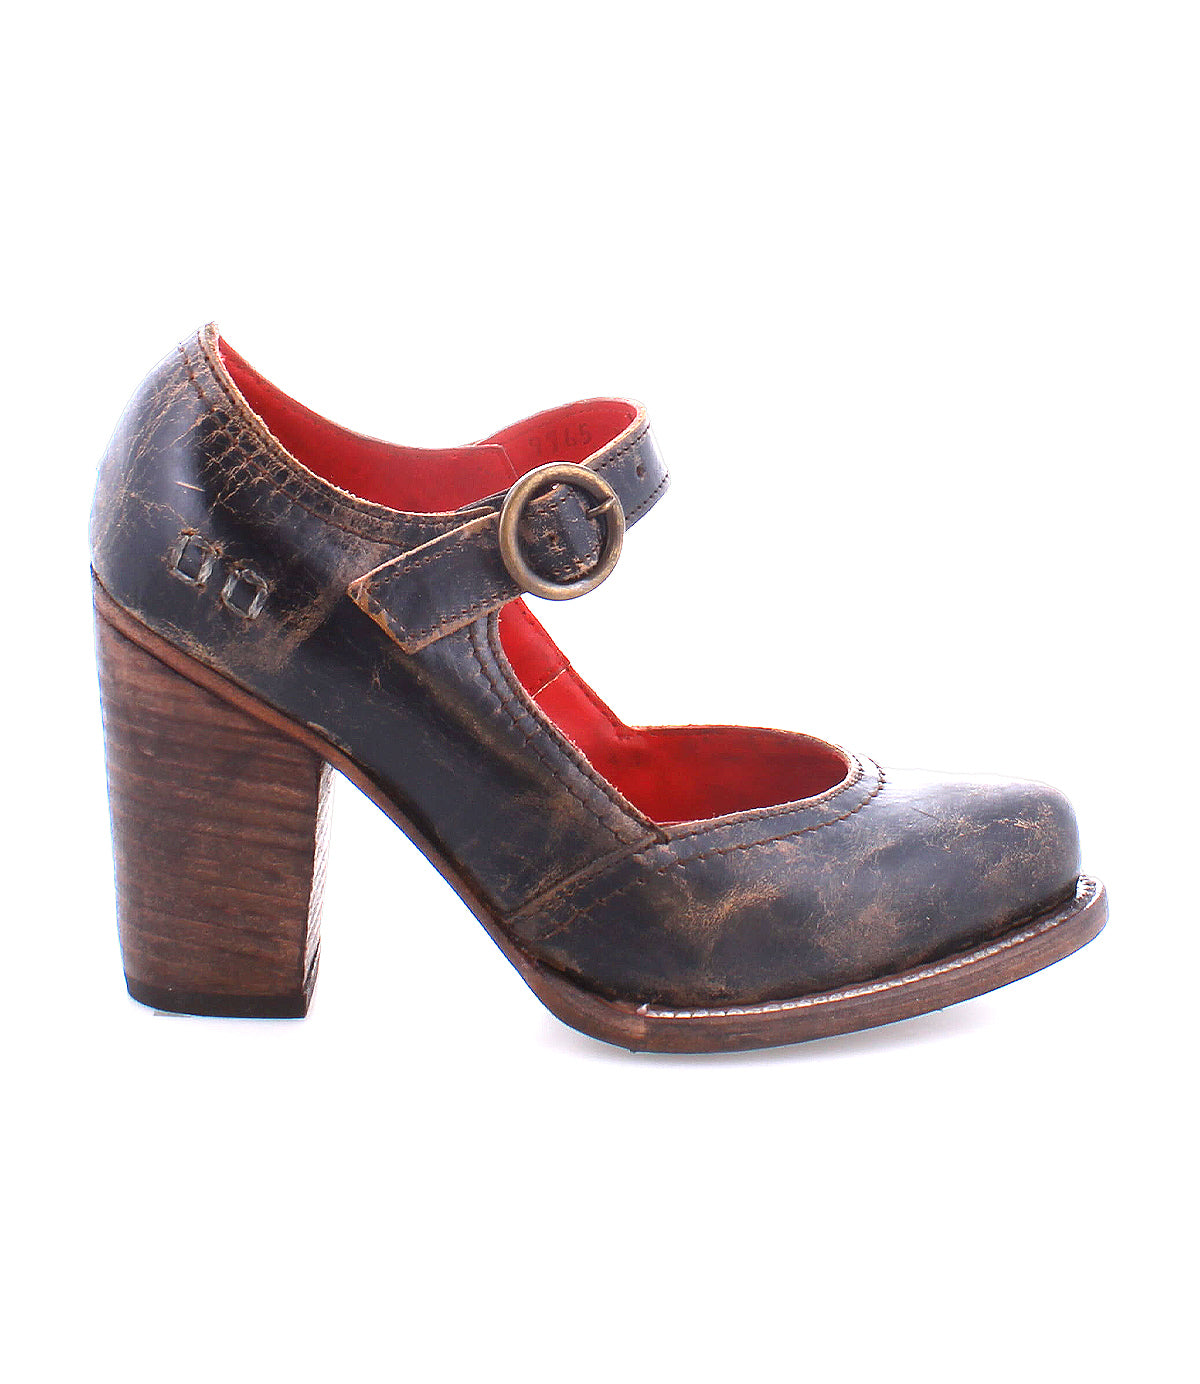 A worn, dark brown Ishtar mary jane pump by Bed Stu with an adjustable strap and block heel, displayed against a white background.